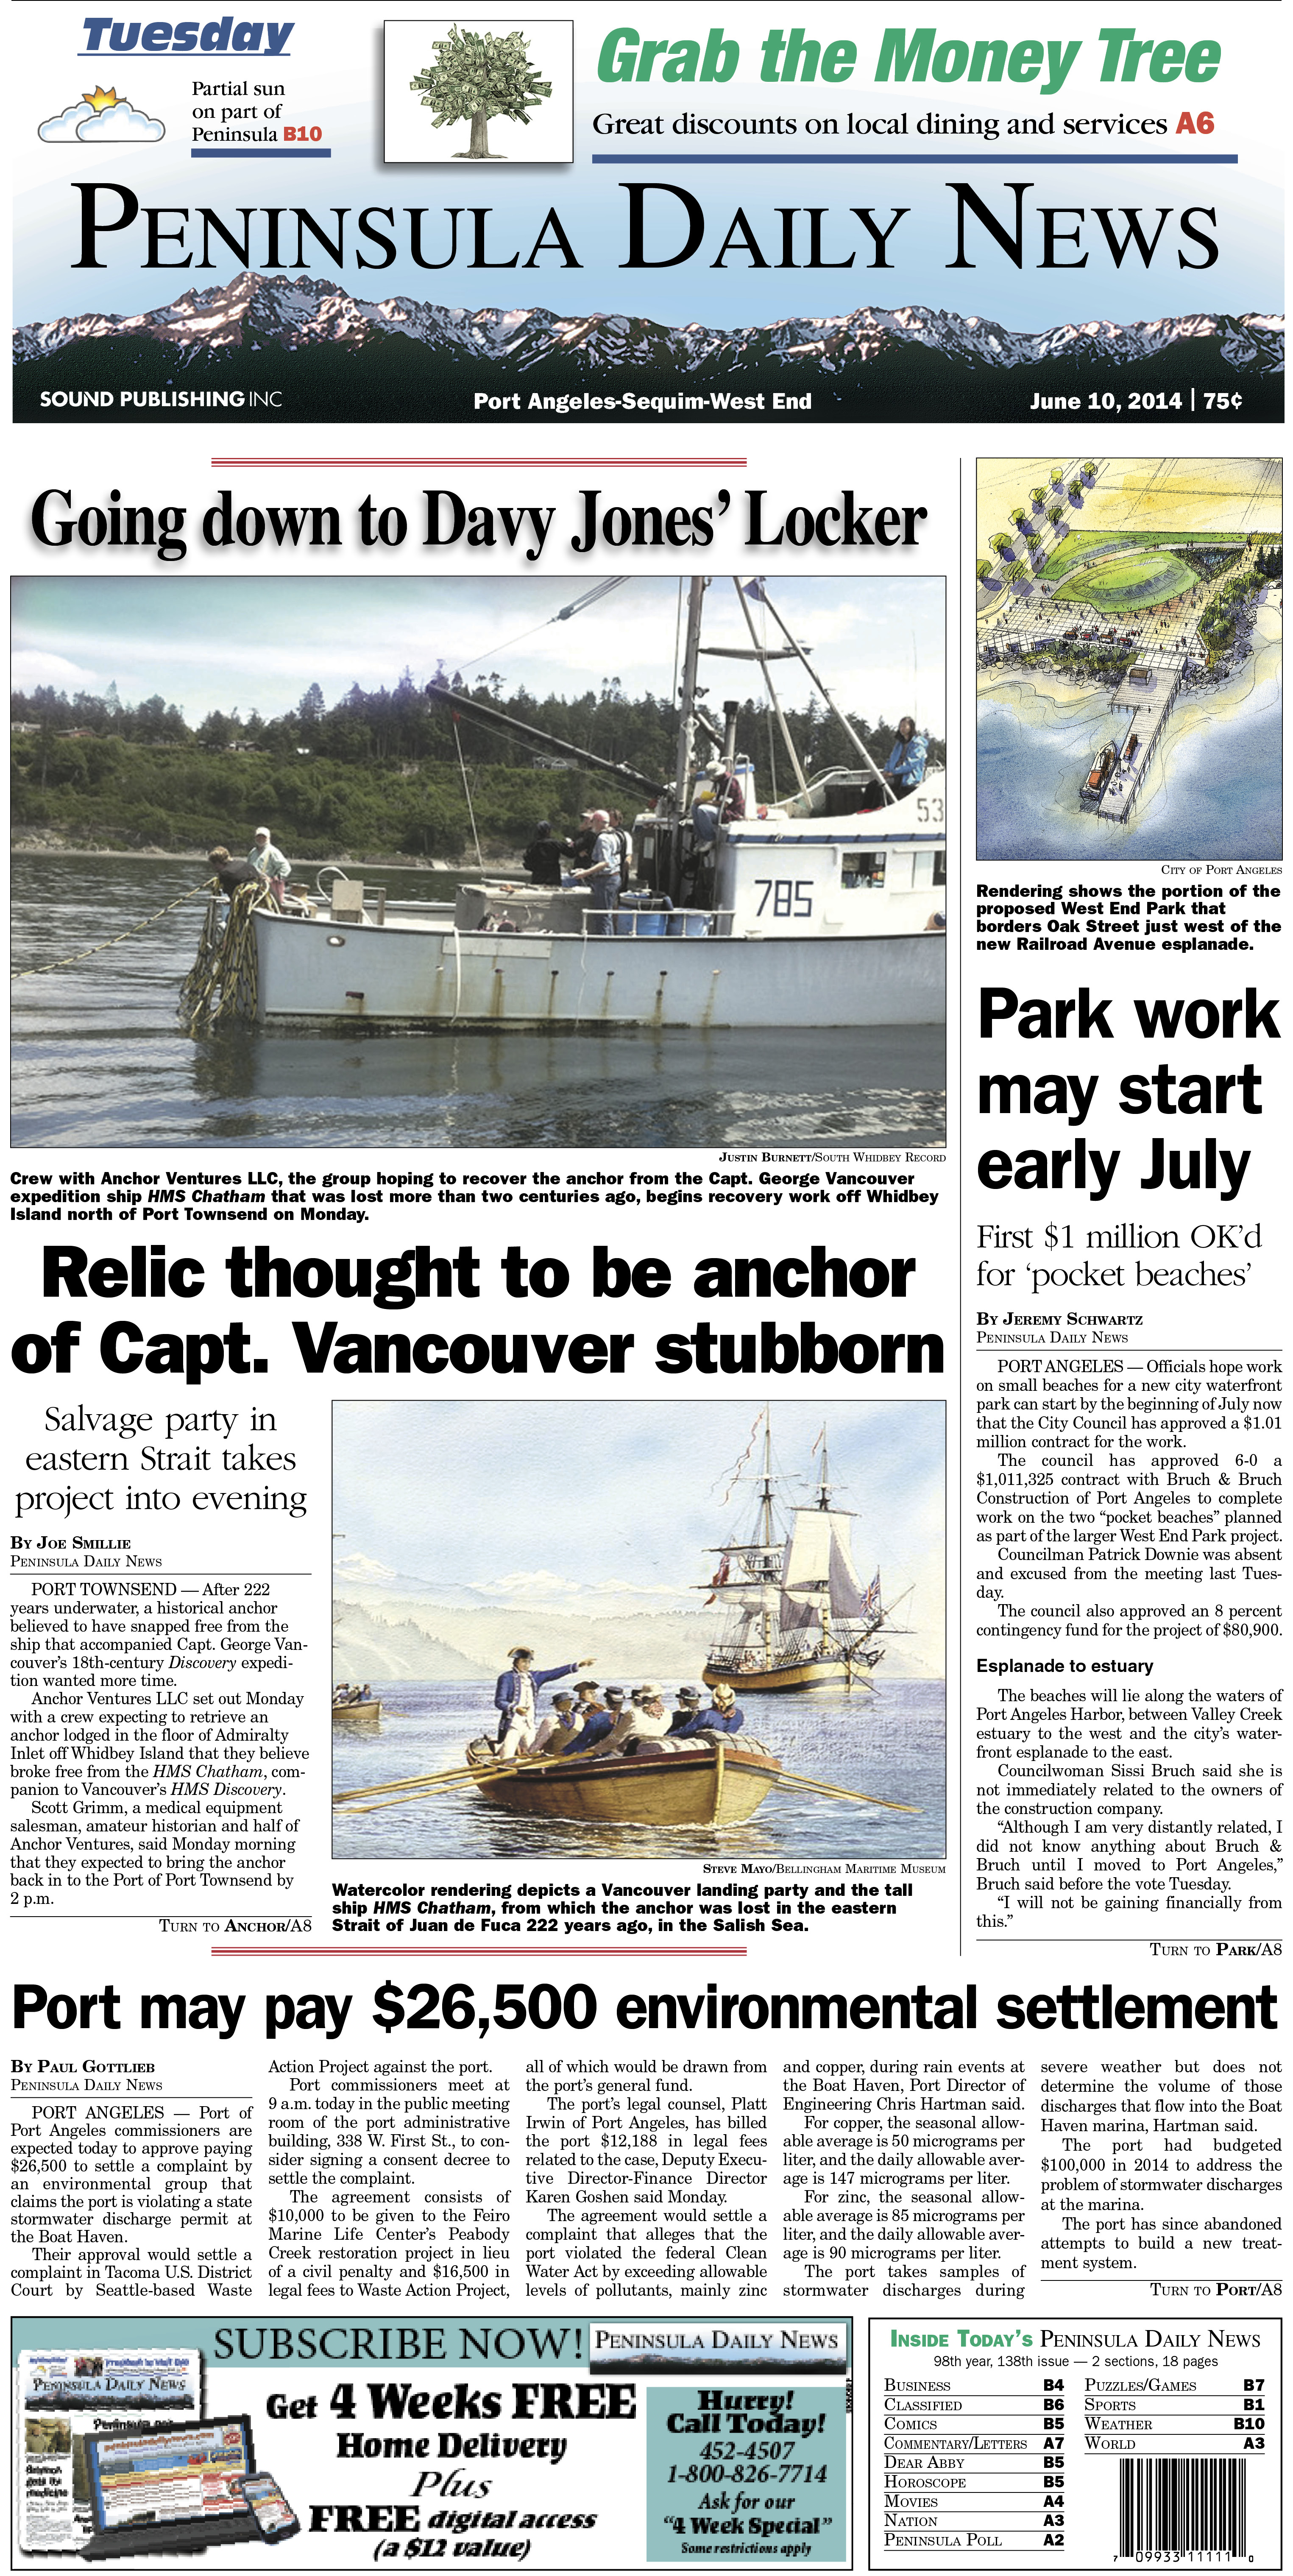 PDN's front page for today's Clallam County readers.